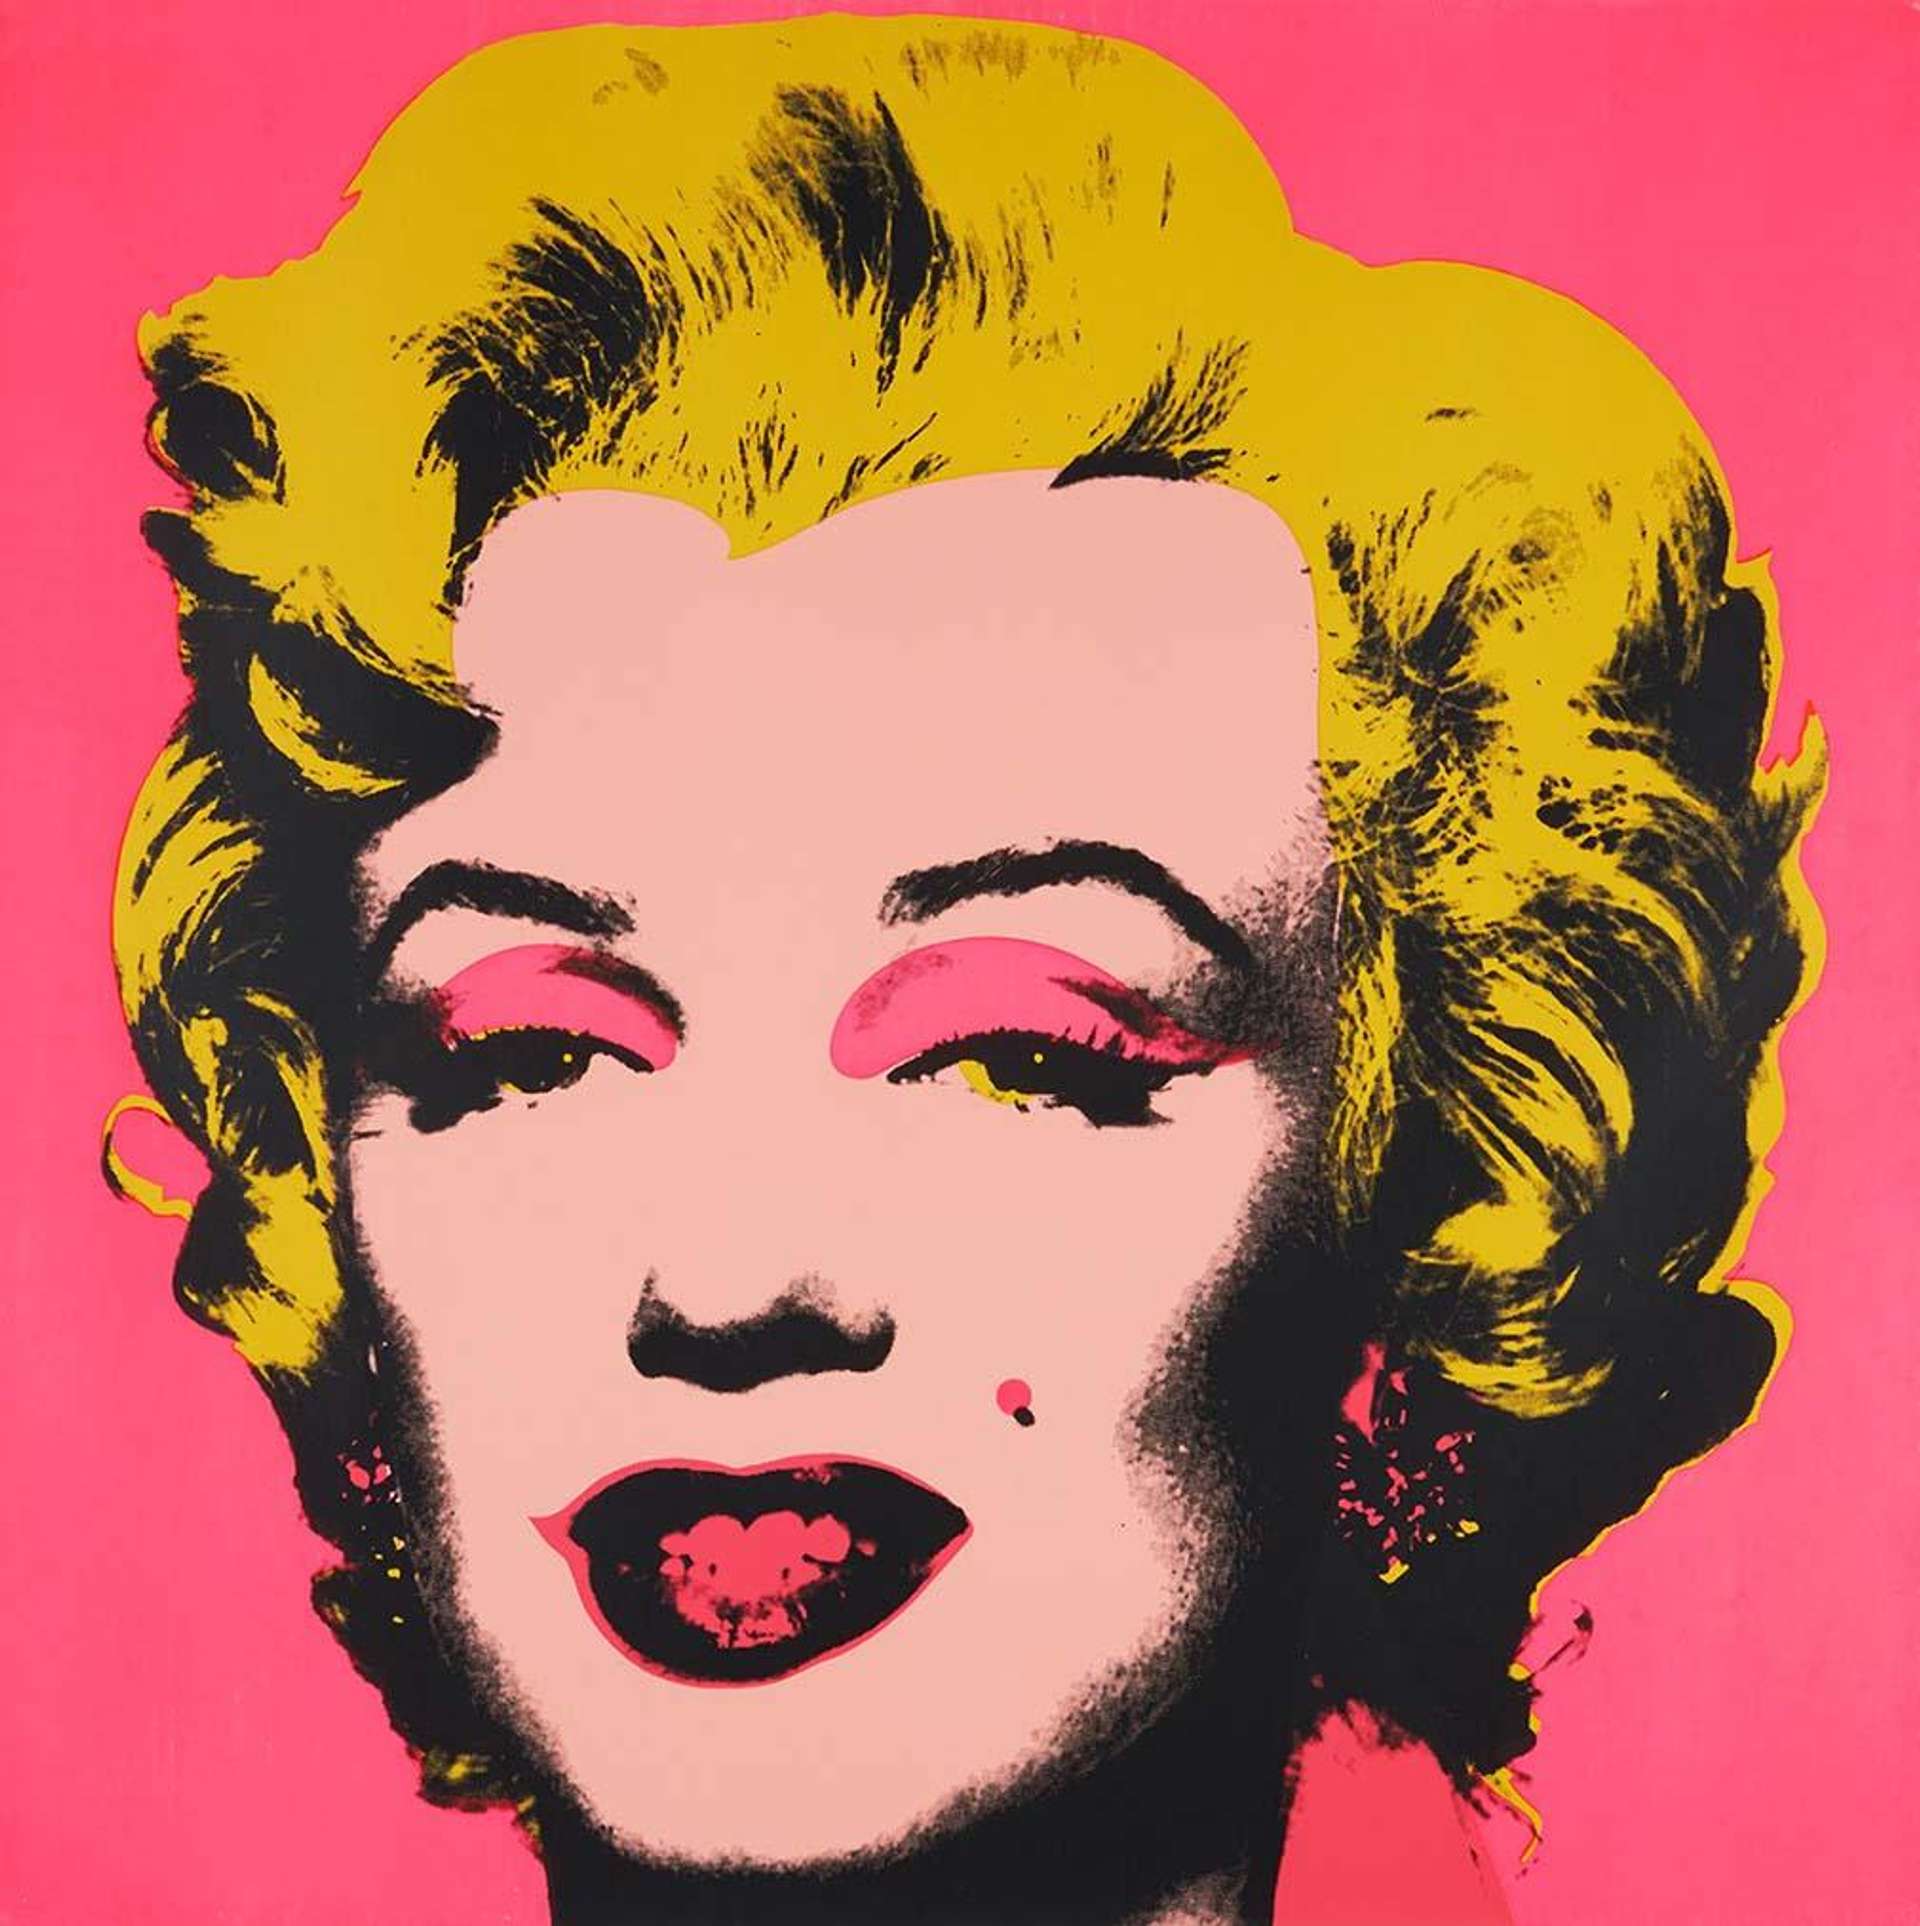 A screenprint by Andy Warhol depicting a close-up portrait of Marilyn Monroe against a bright pink background, with yellow hair and graphic black outlines.